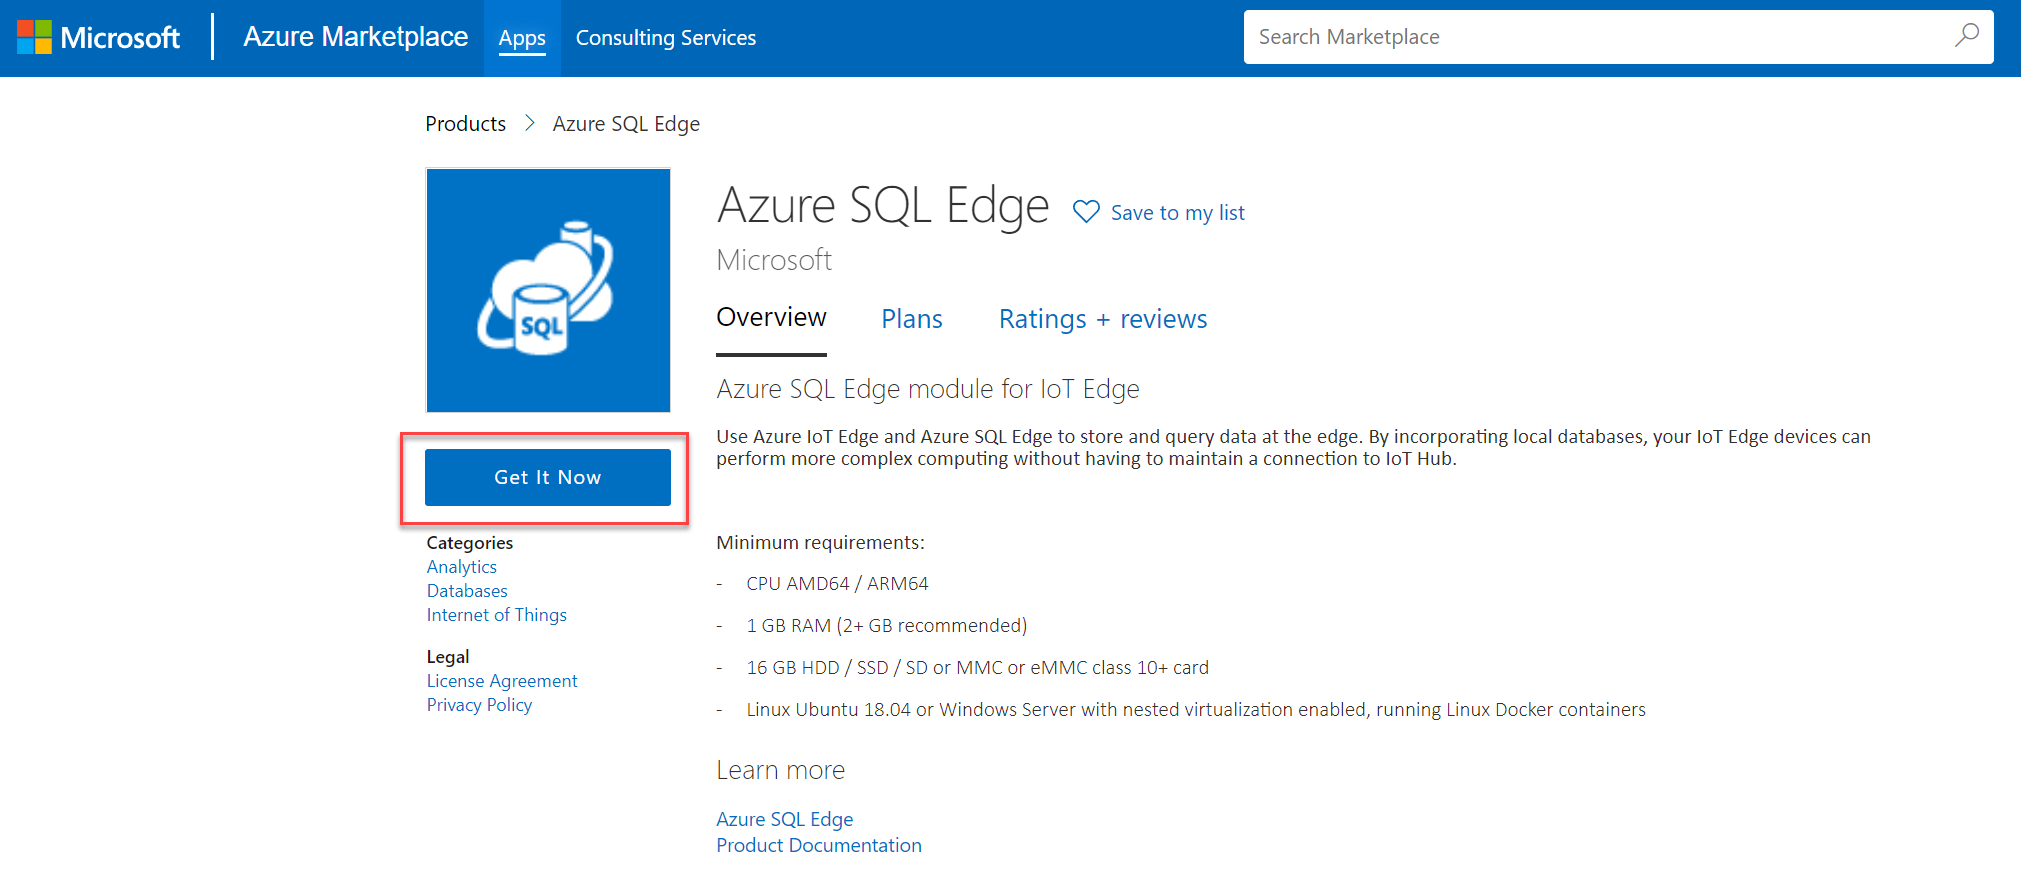 The Azure SQL Edge module overview screen displays with the Get It Now button highlighted.